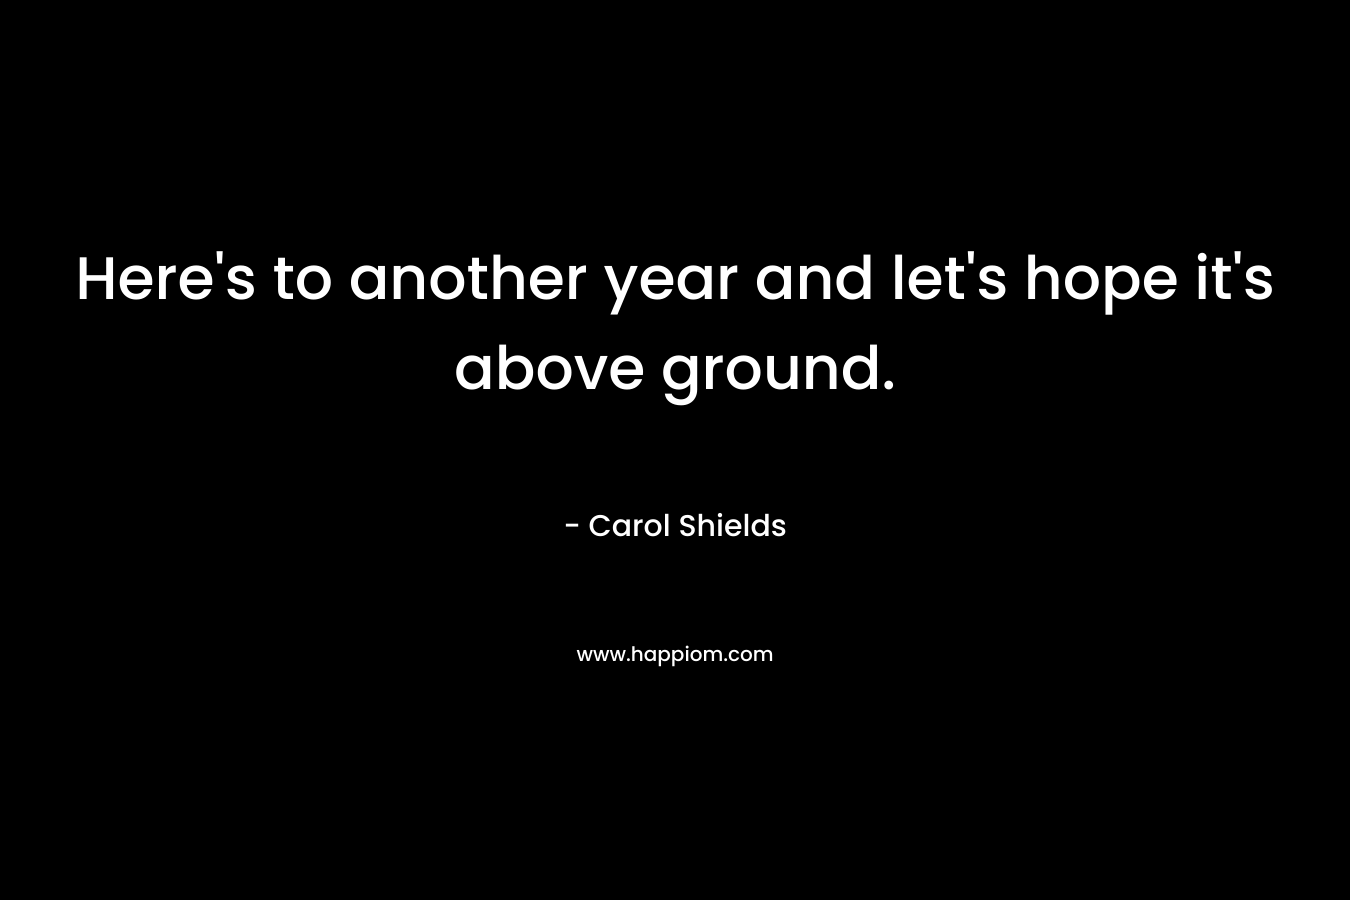 Here's to another year and let's hope it's above ground.